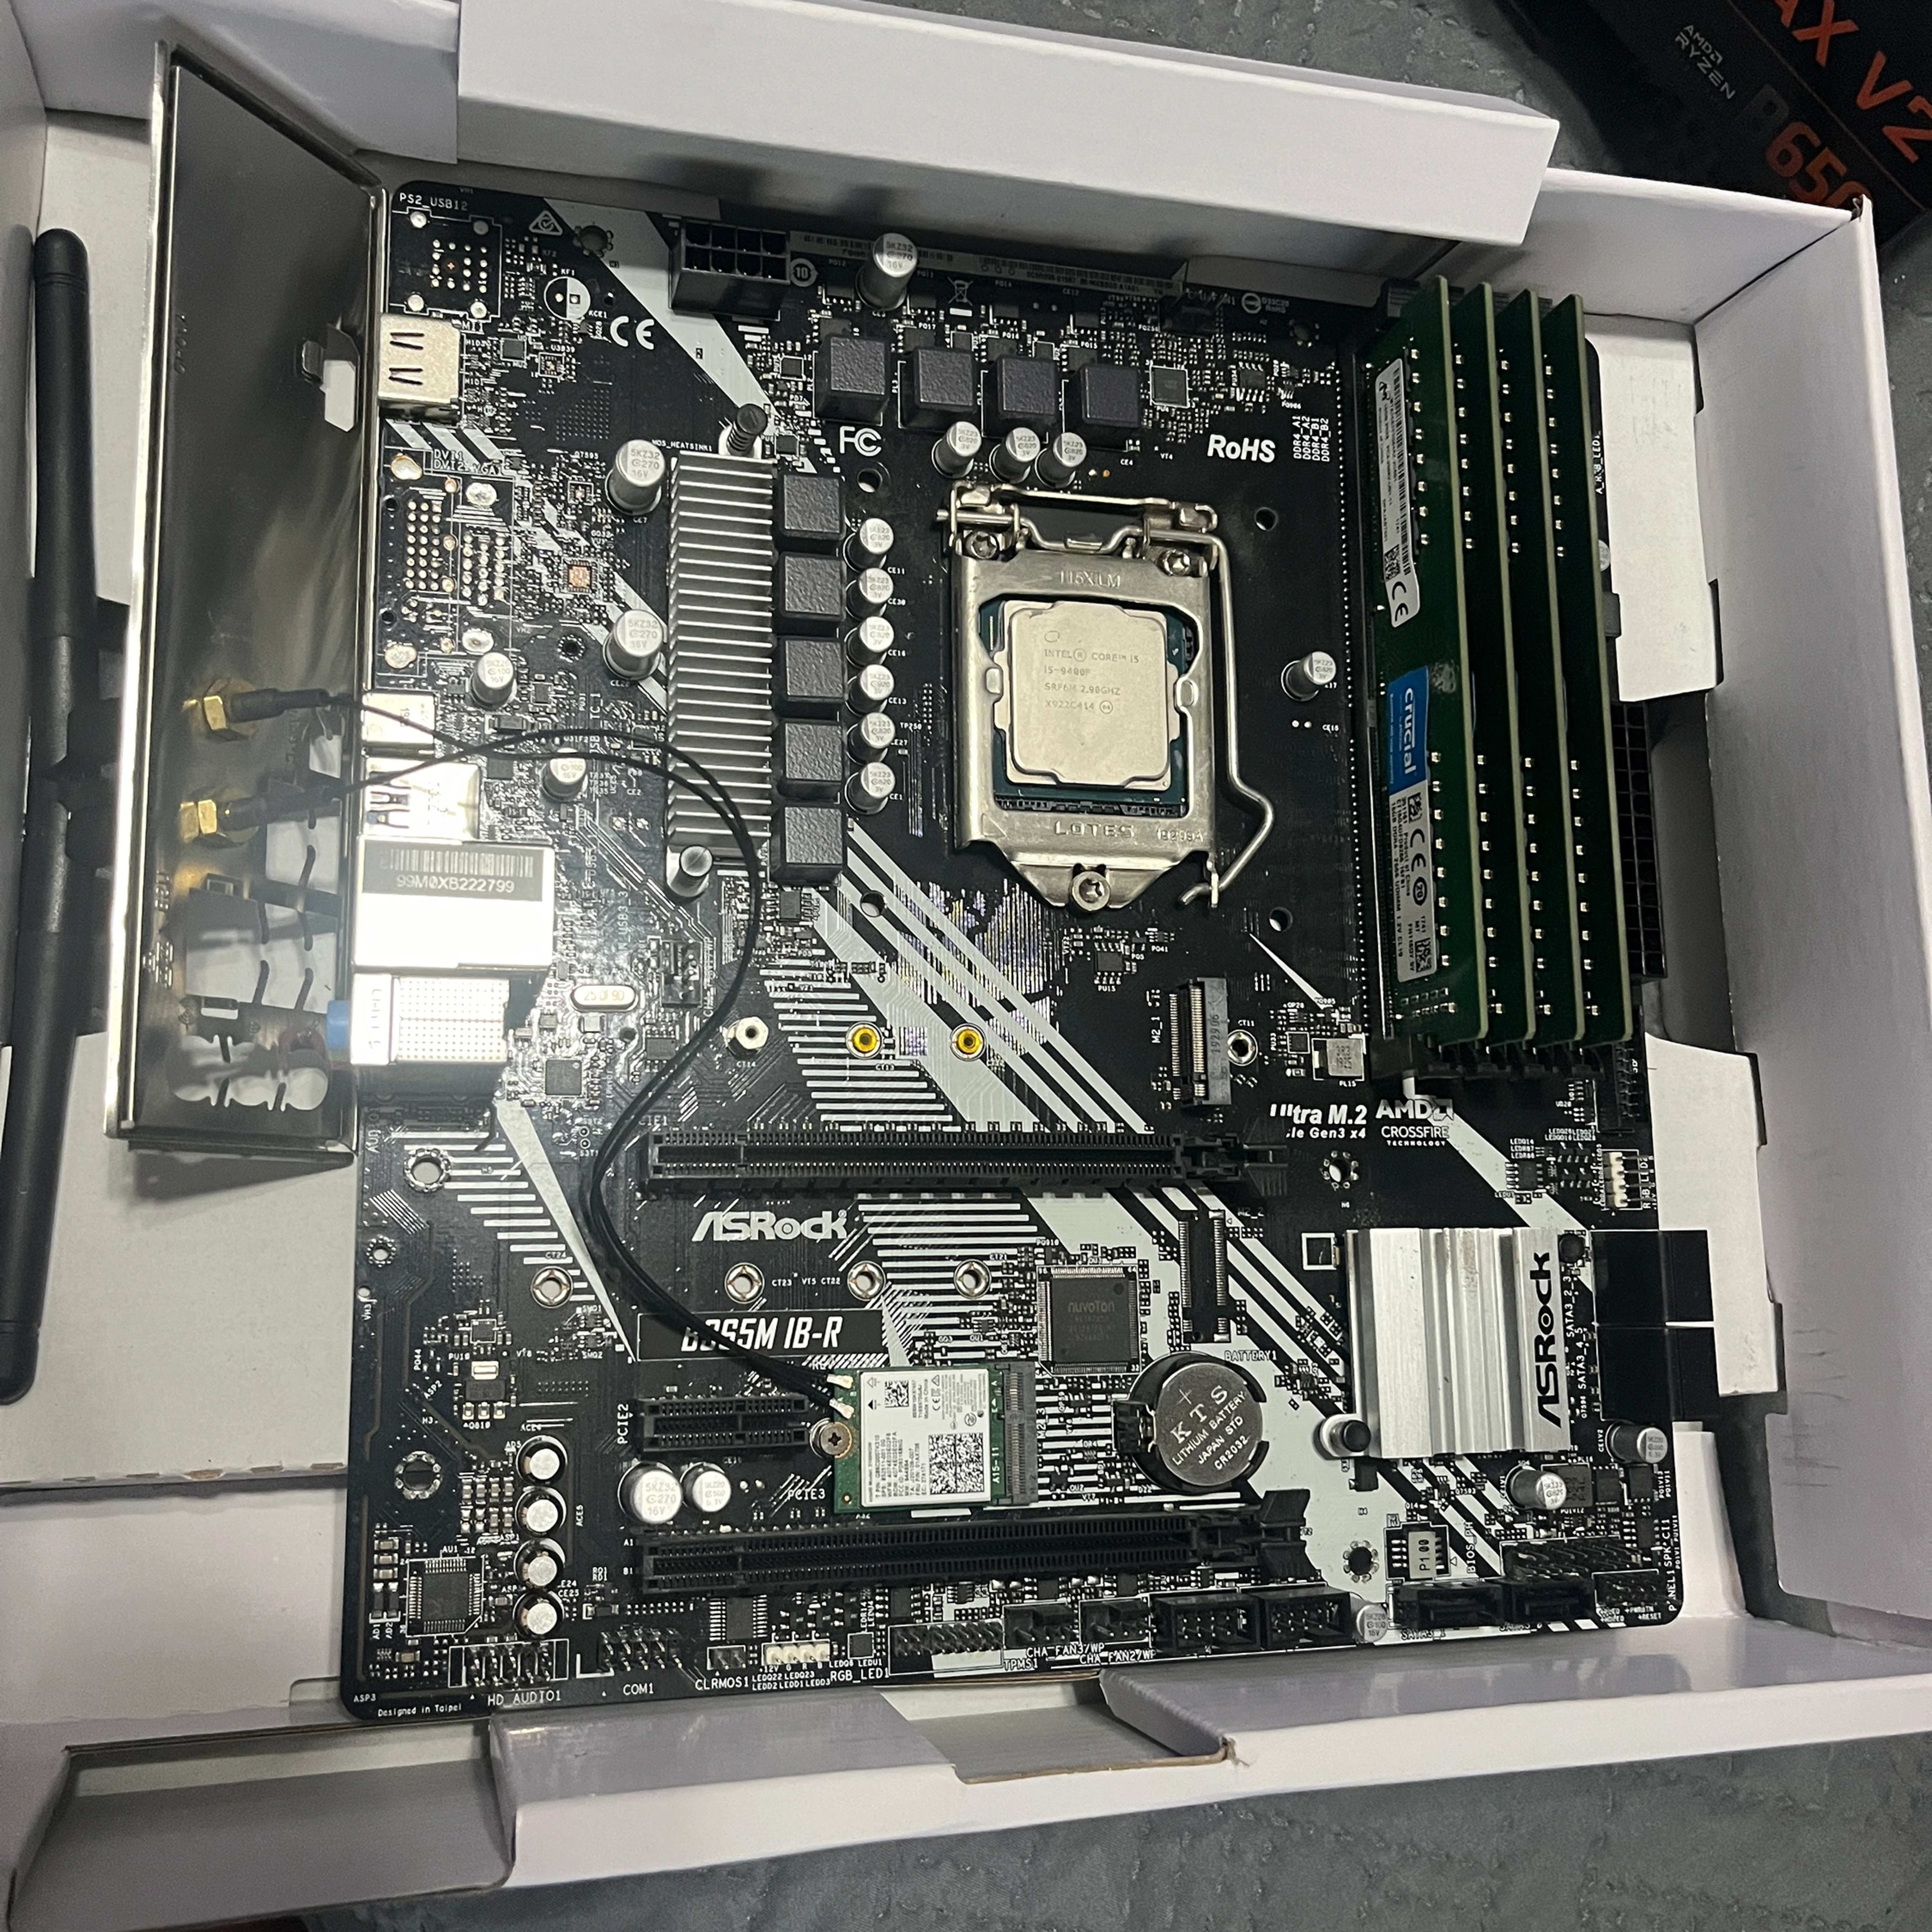 ASRock B365M IB-R Motherboard with Intel i5 9400F 2.9 Ghz CPU and 64 GB of DDR4 2666 Crucial Ram